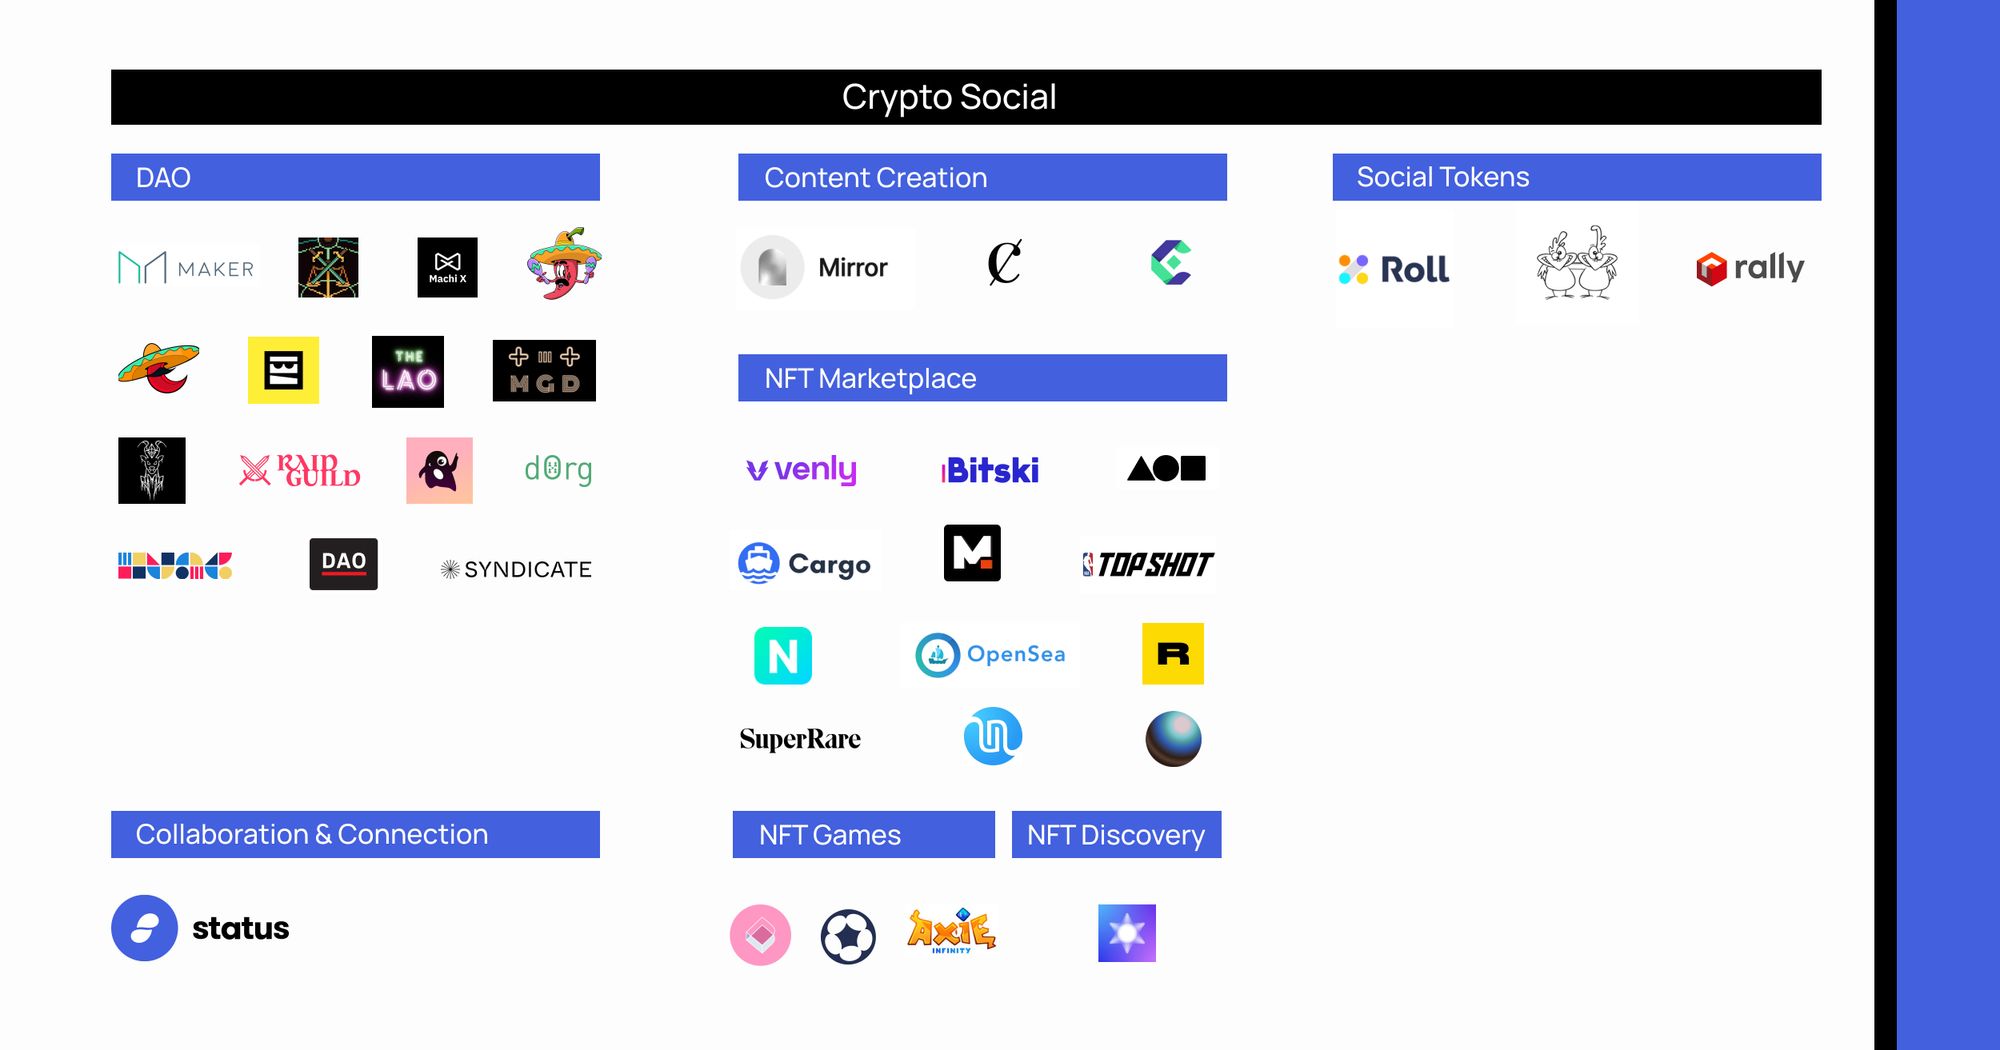 More Than a Trend: Crypto & Decentralized Social Networks